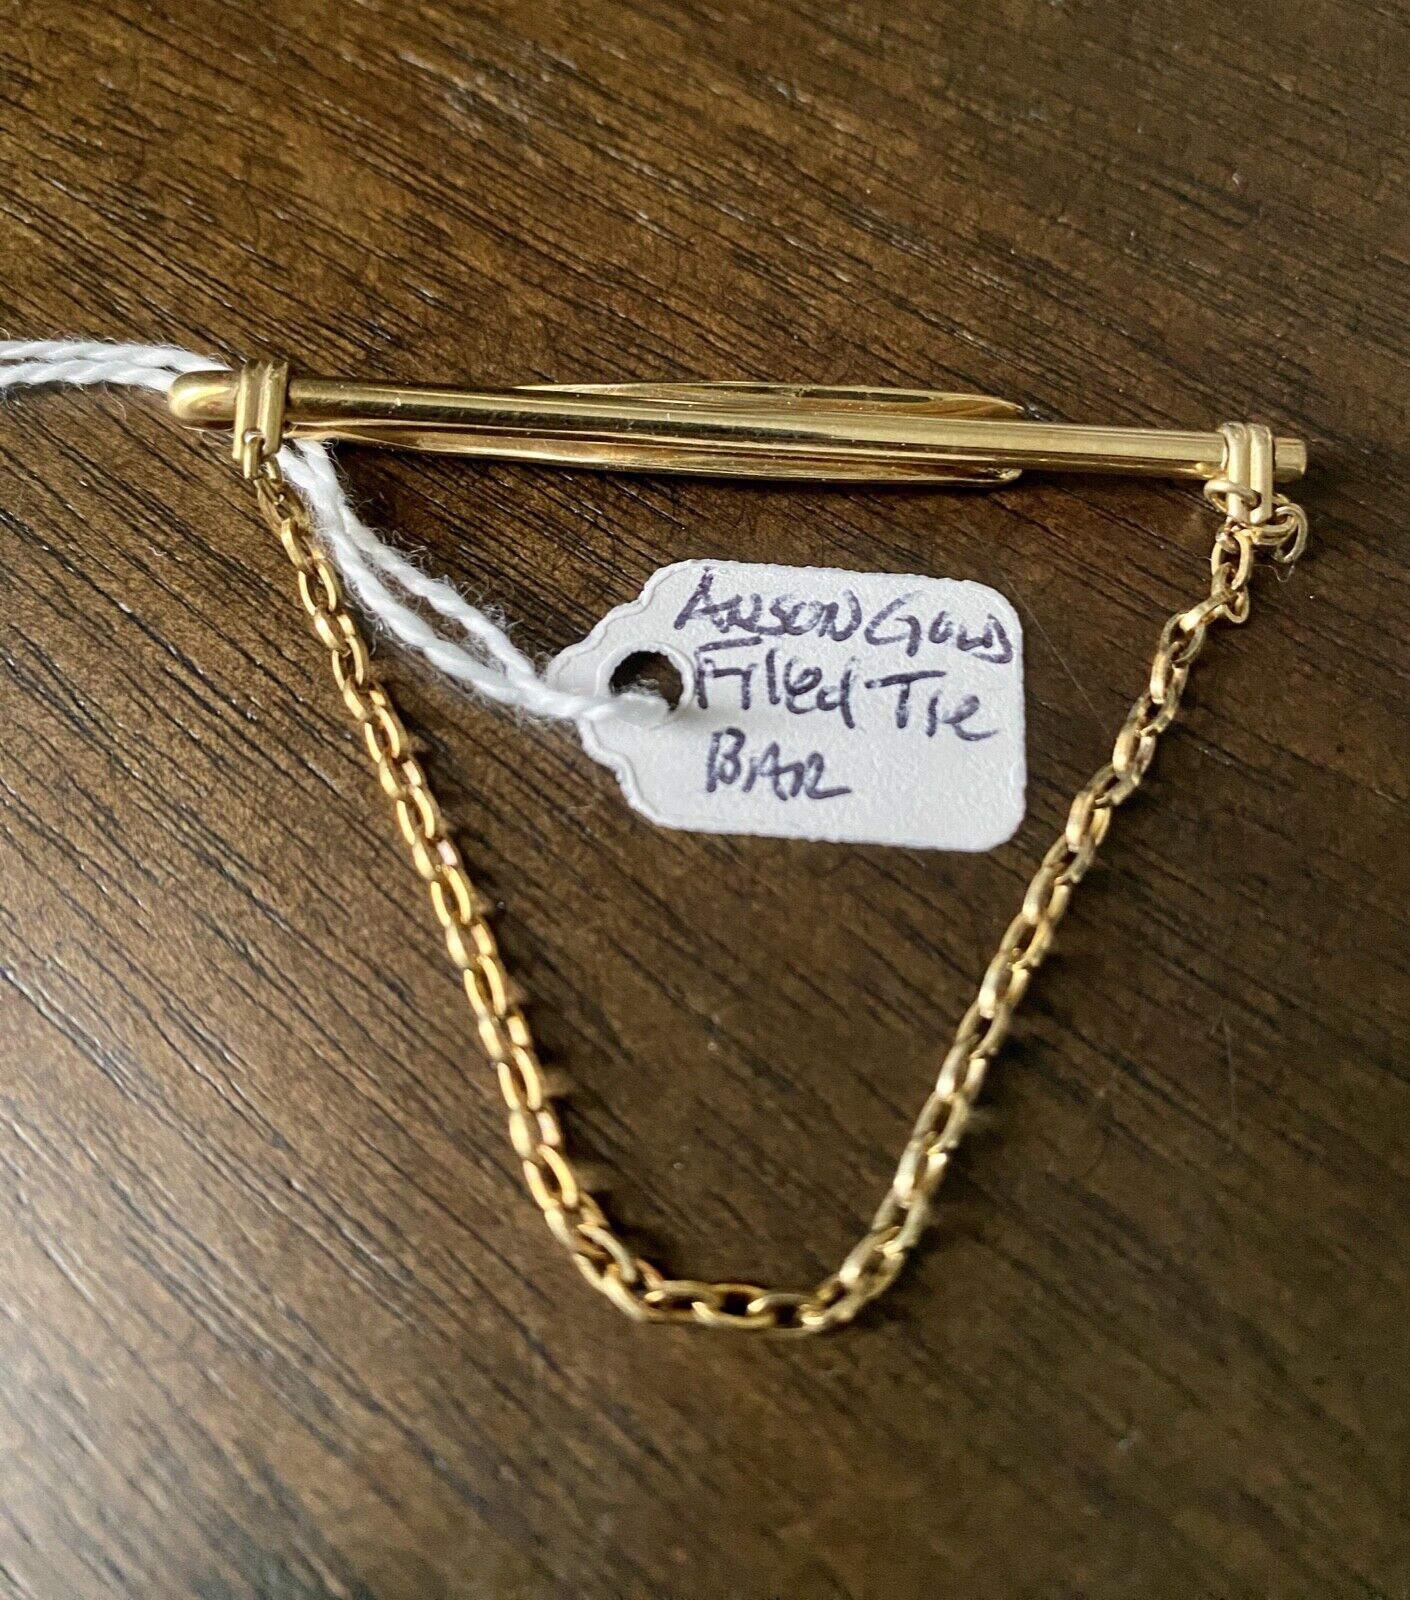 Vintage Anson 12k Gold Fill  Tie Clip Bar with Chain